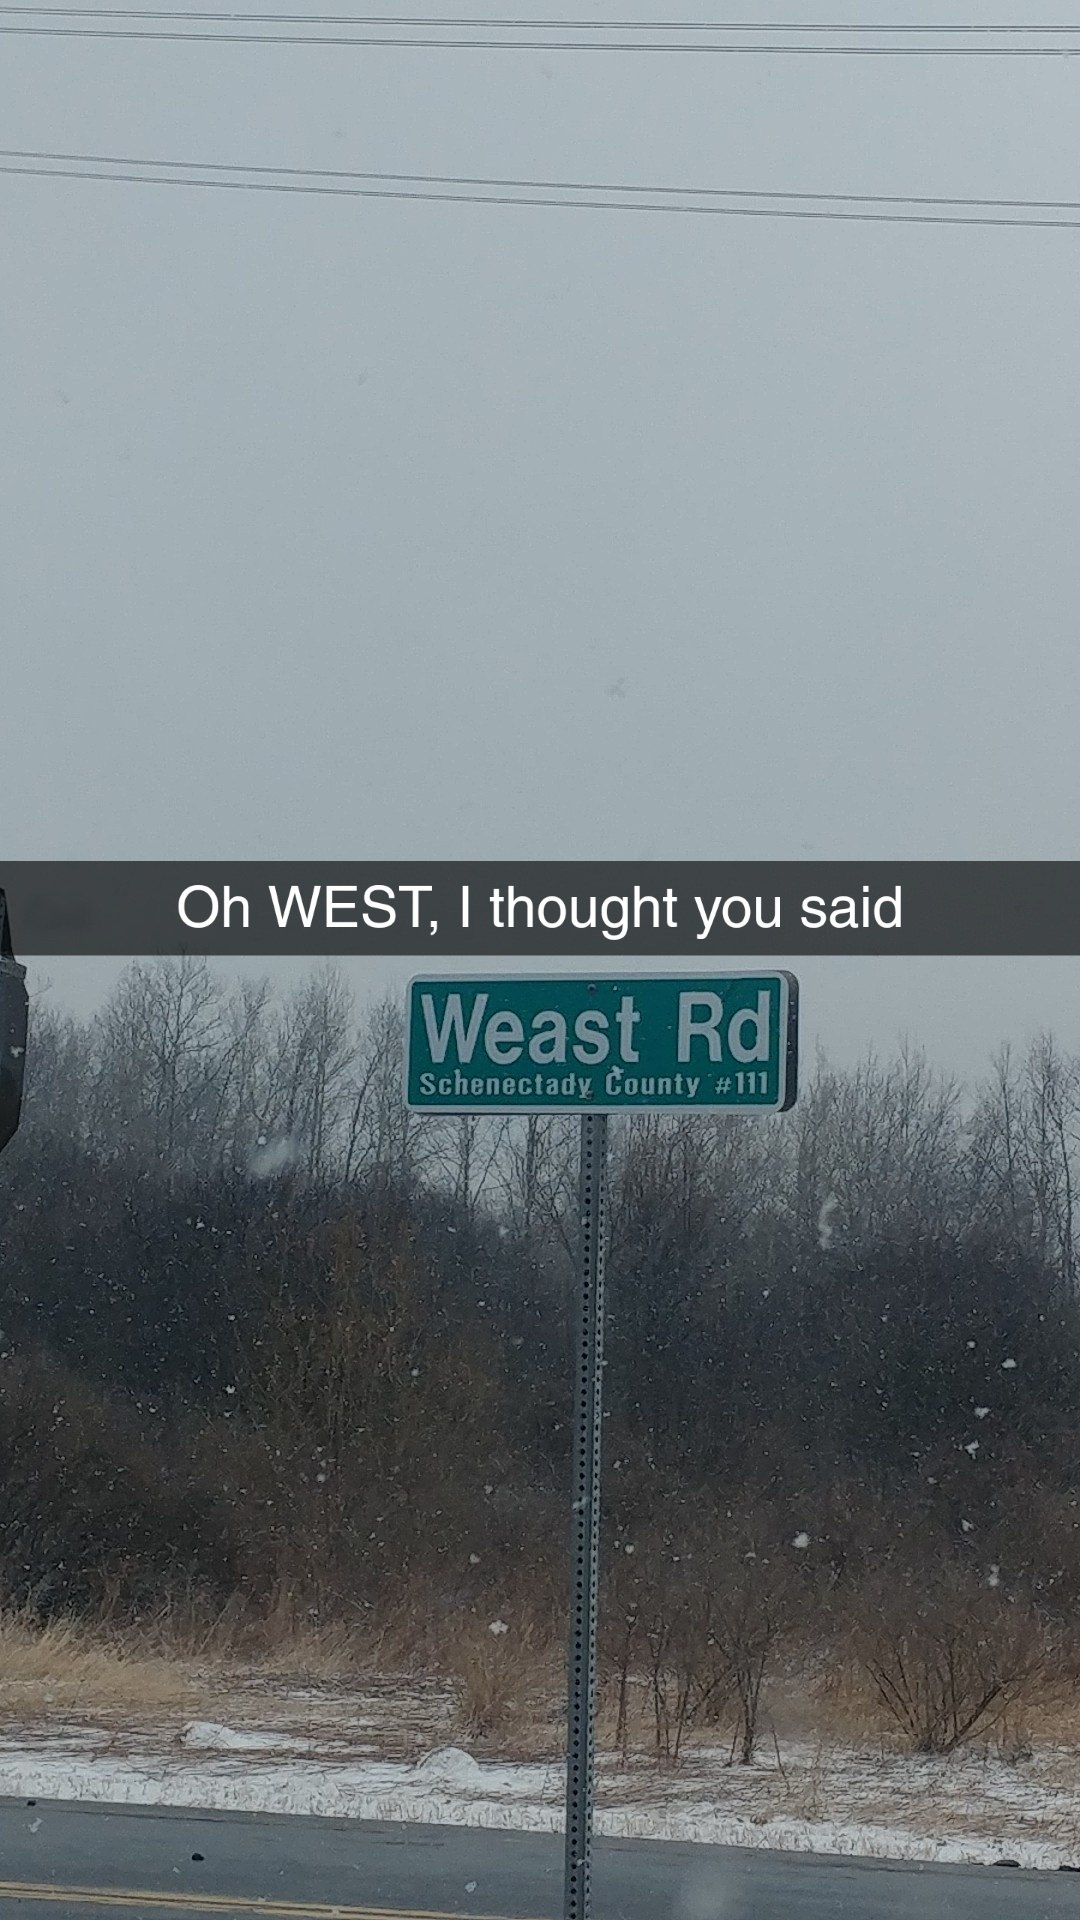 road - Oh West, I thought you said Weast Rd Schenectady County